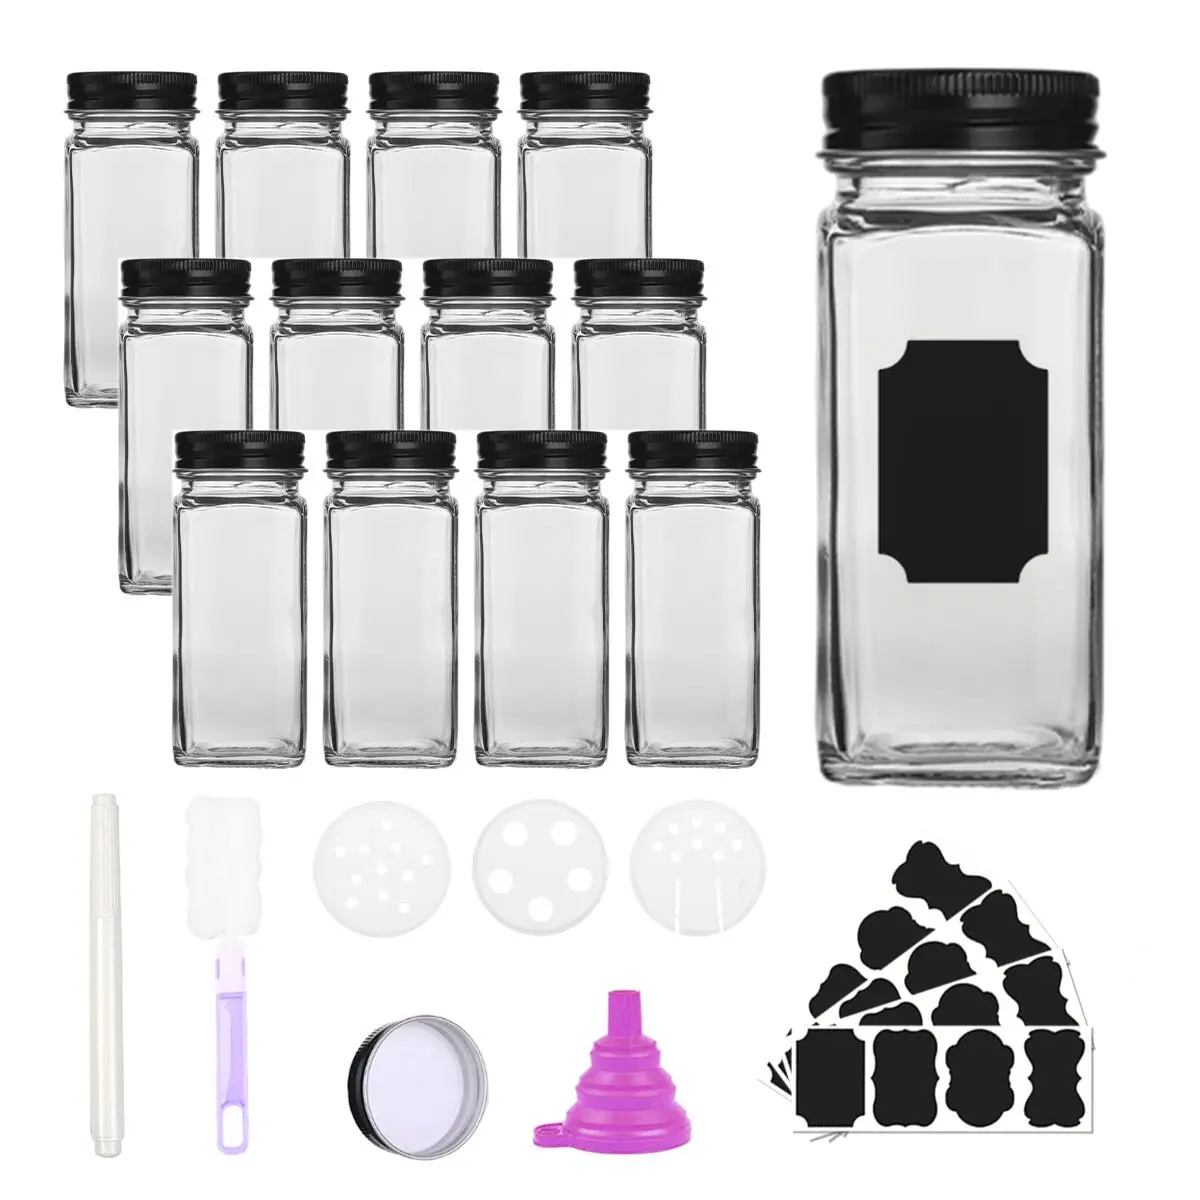 Wholesale 120ml Glass Spice Jars 4oz Empty Square Spice Bottles Shaker Lids  And Airtight Metal Roller Caps From Sl100, $1.78